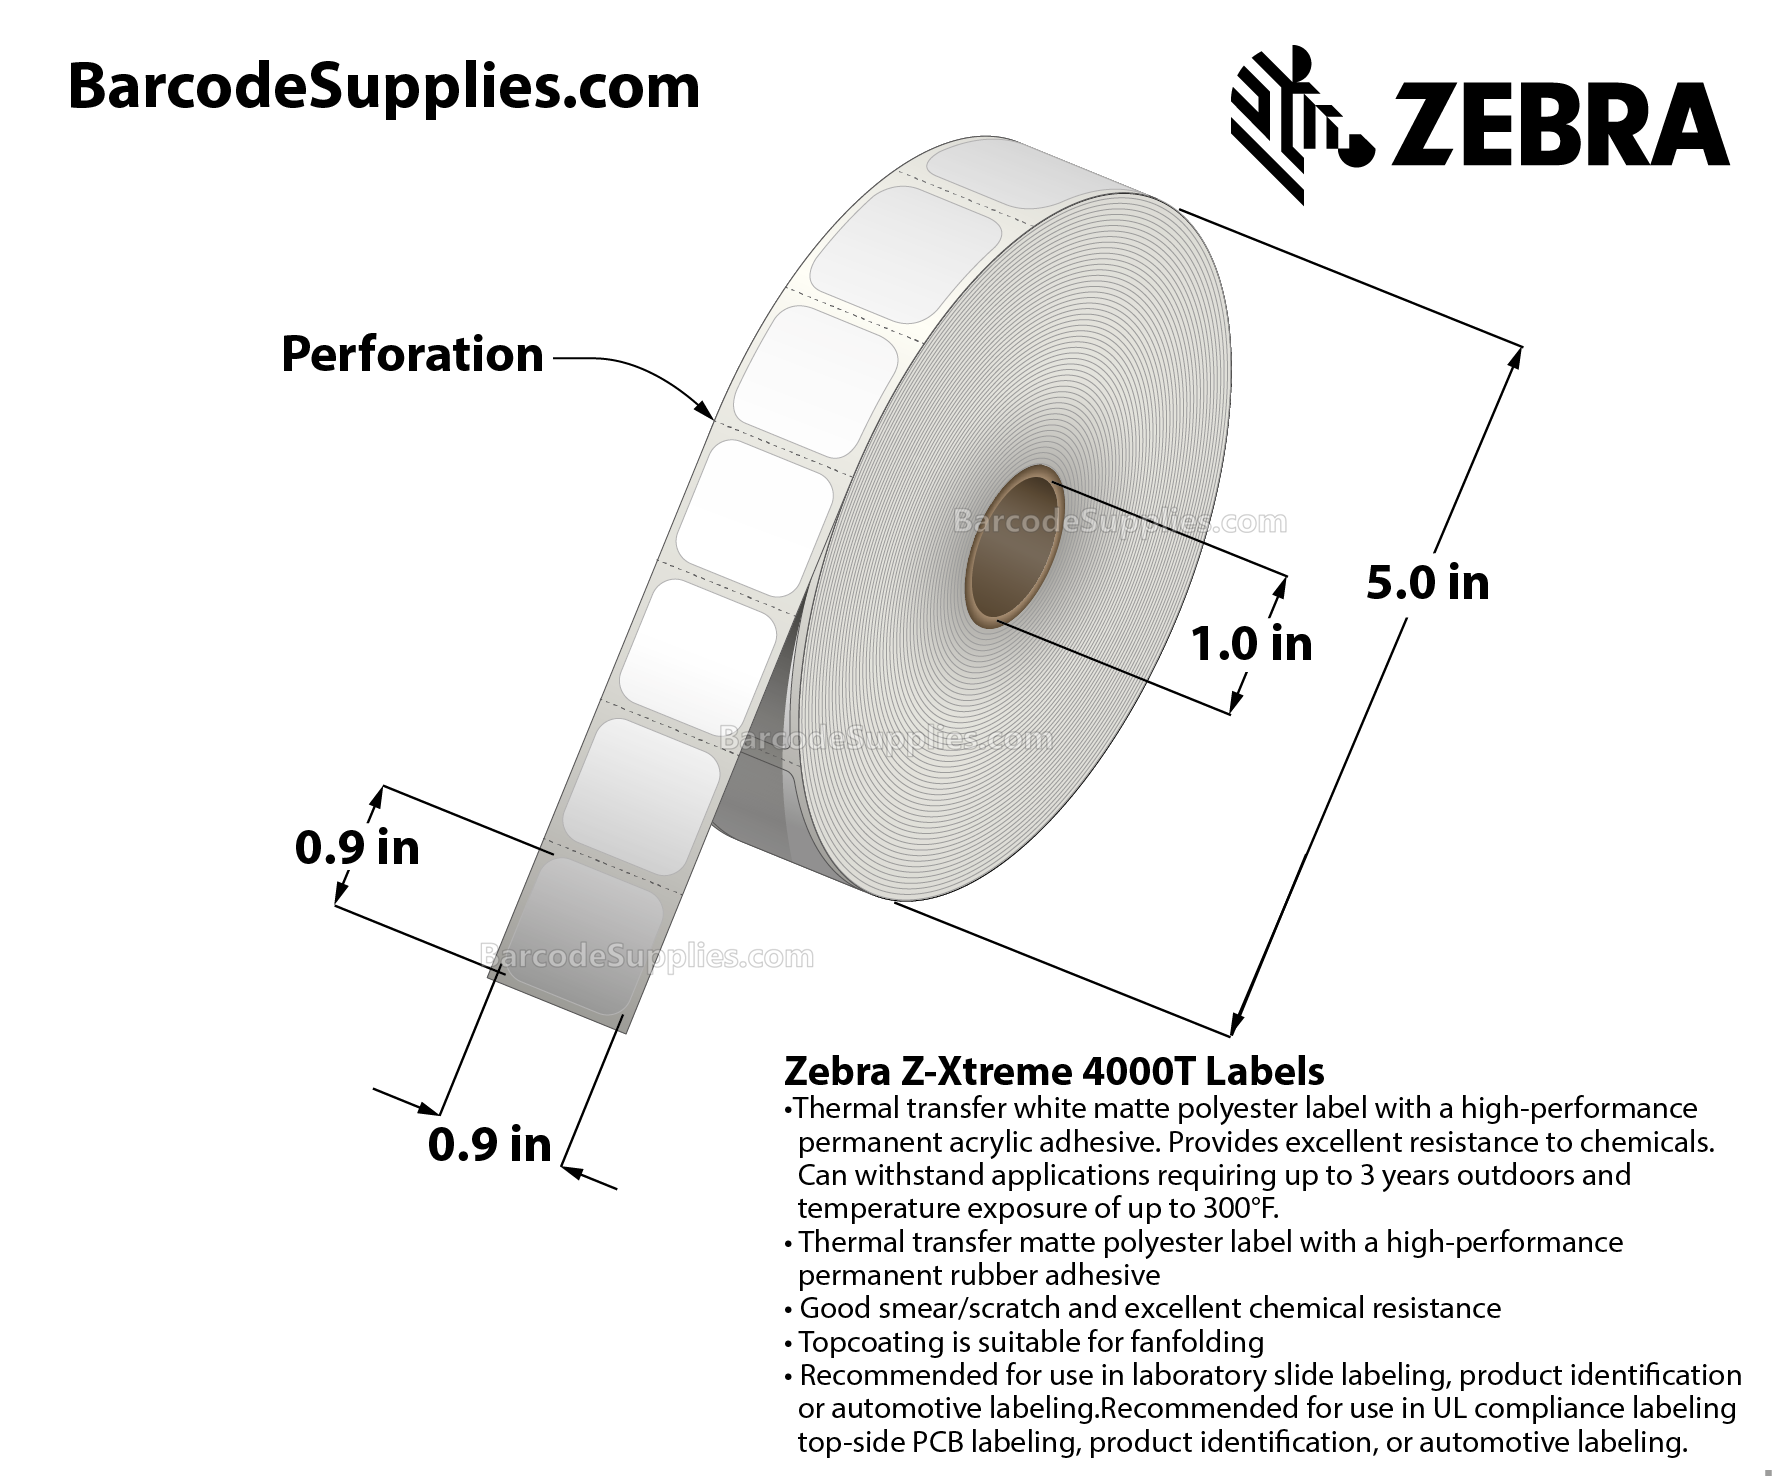 0.9 x 0.9 Thermal Transfer White Z-Xtreme 4000T White Labels With Permanent Adhesive - Perforated - 1000 Labels Per Roll - Carton Of 1 Rolls - 1000 Labels Total - MPN: 10023239